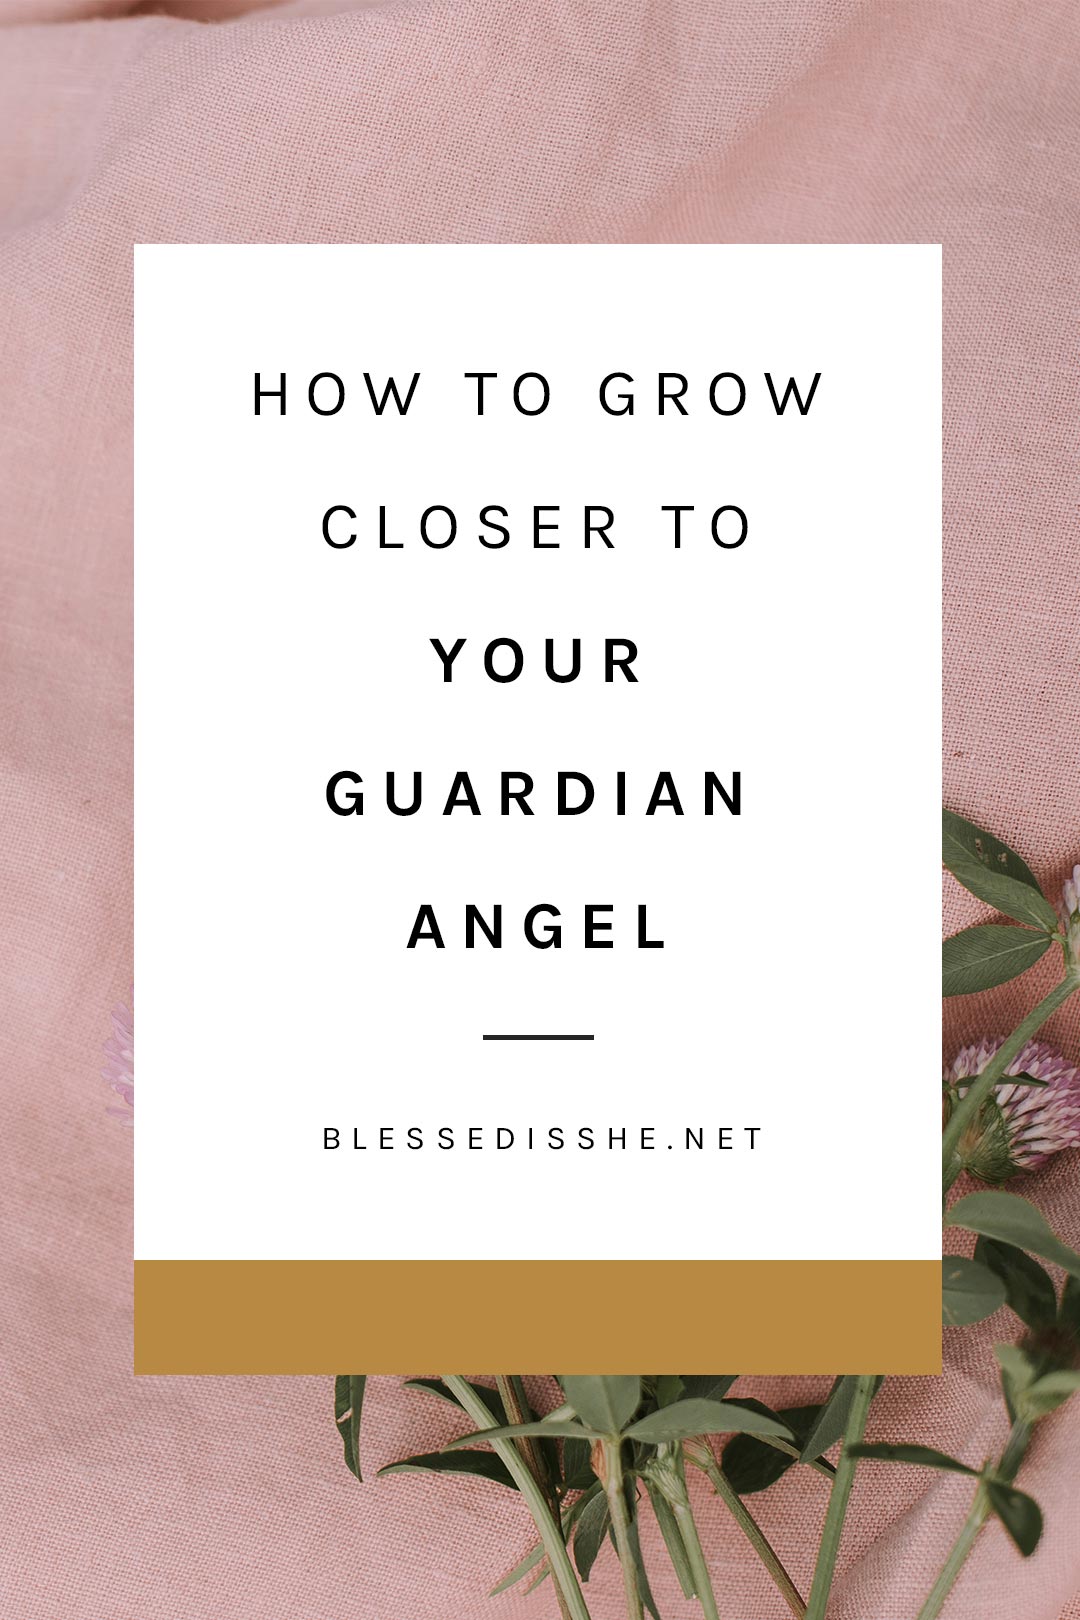 Are guardian angels really a thing? (And how do we know?)